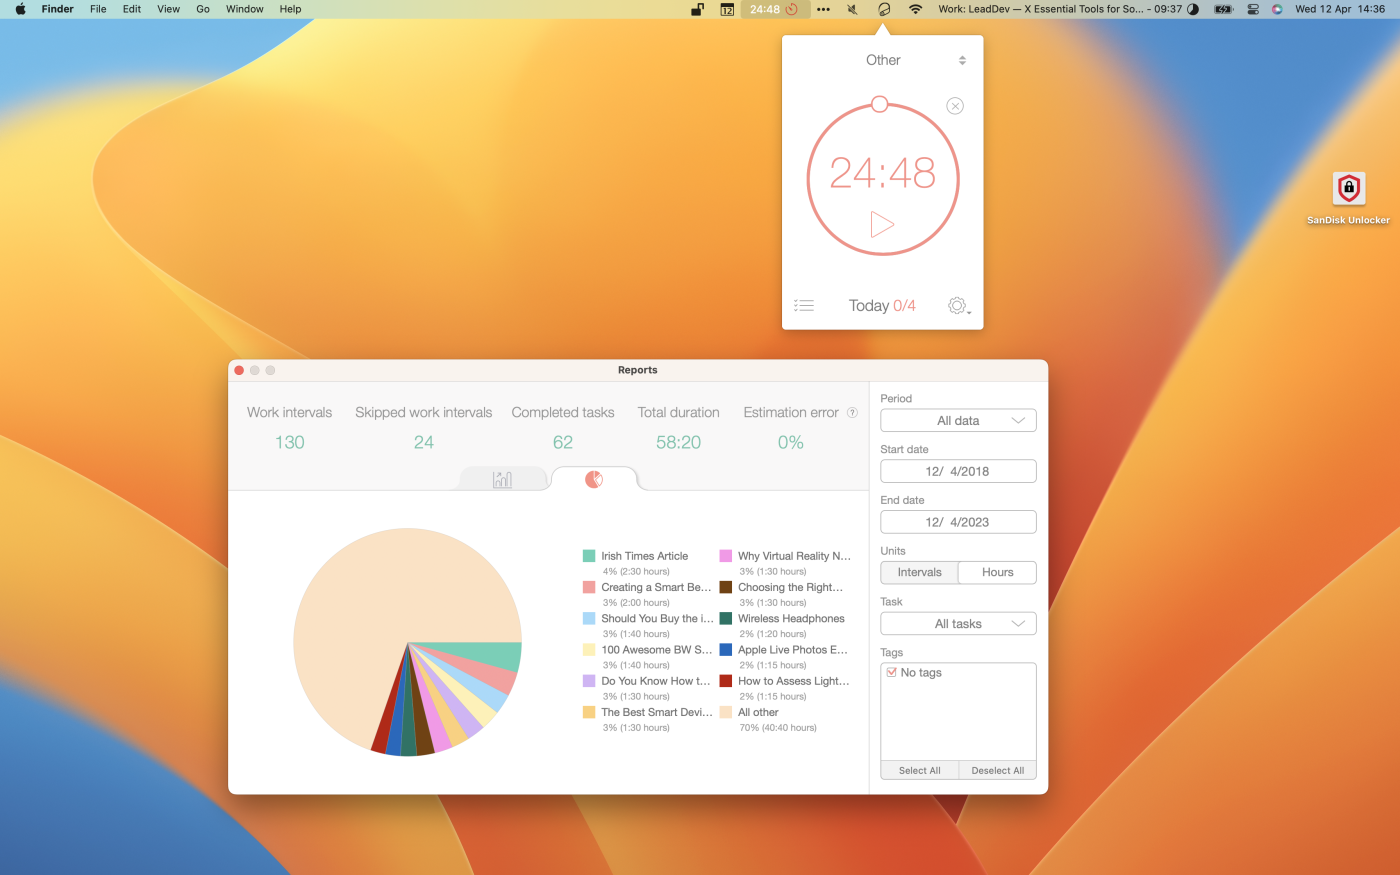 Be Focused, our pick for the best Pomodoro app for most Mac users